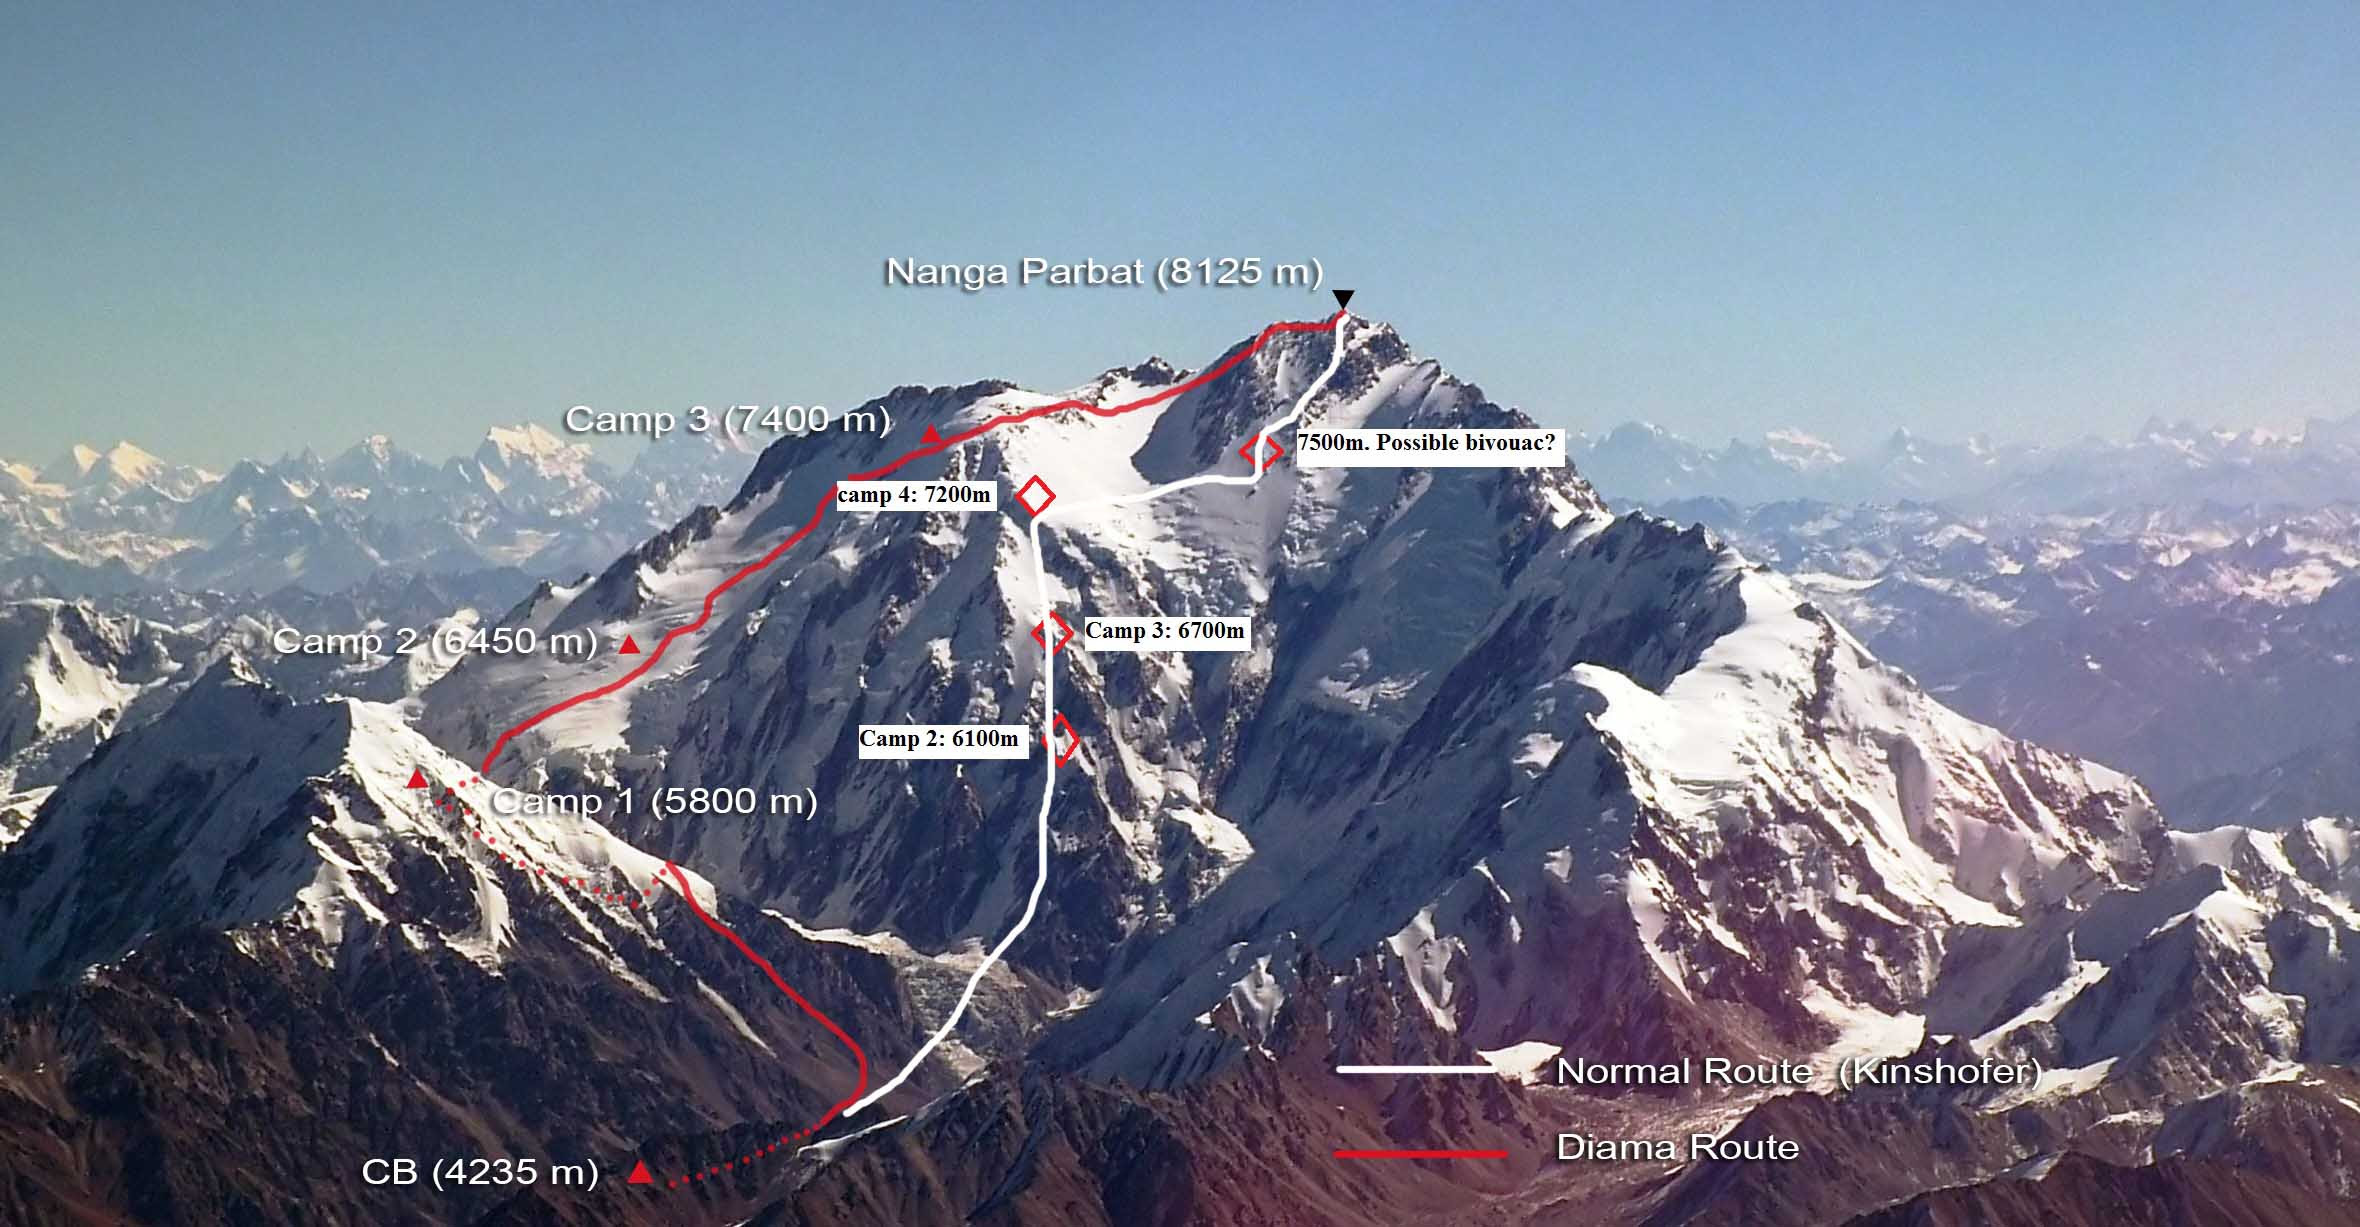 Nanga Parbat New Route Attempt Has Commenced